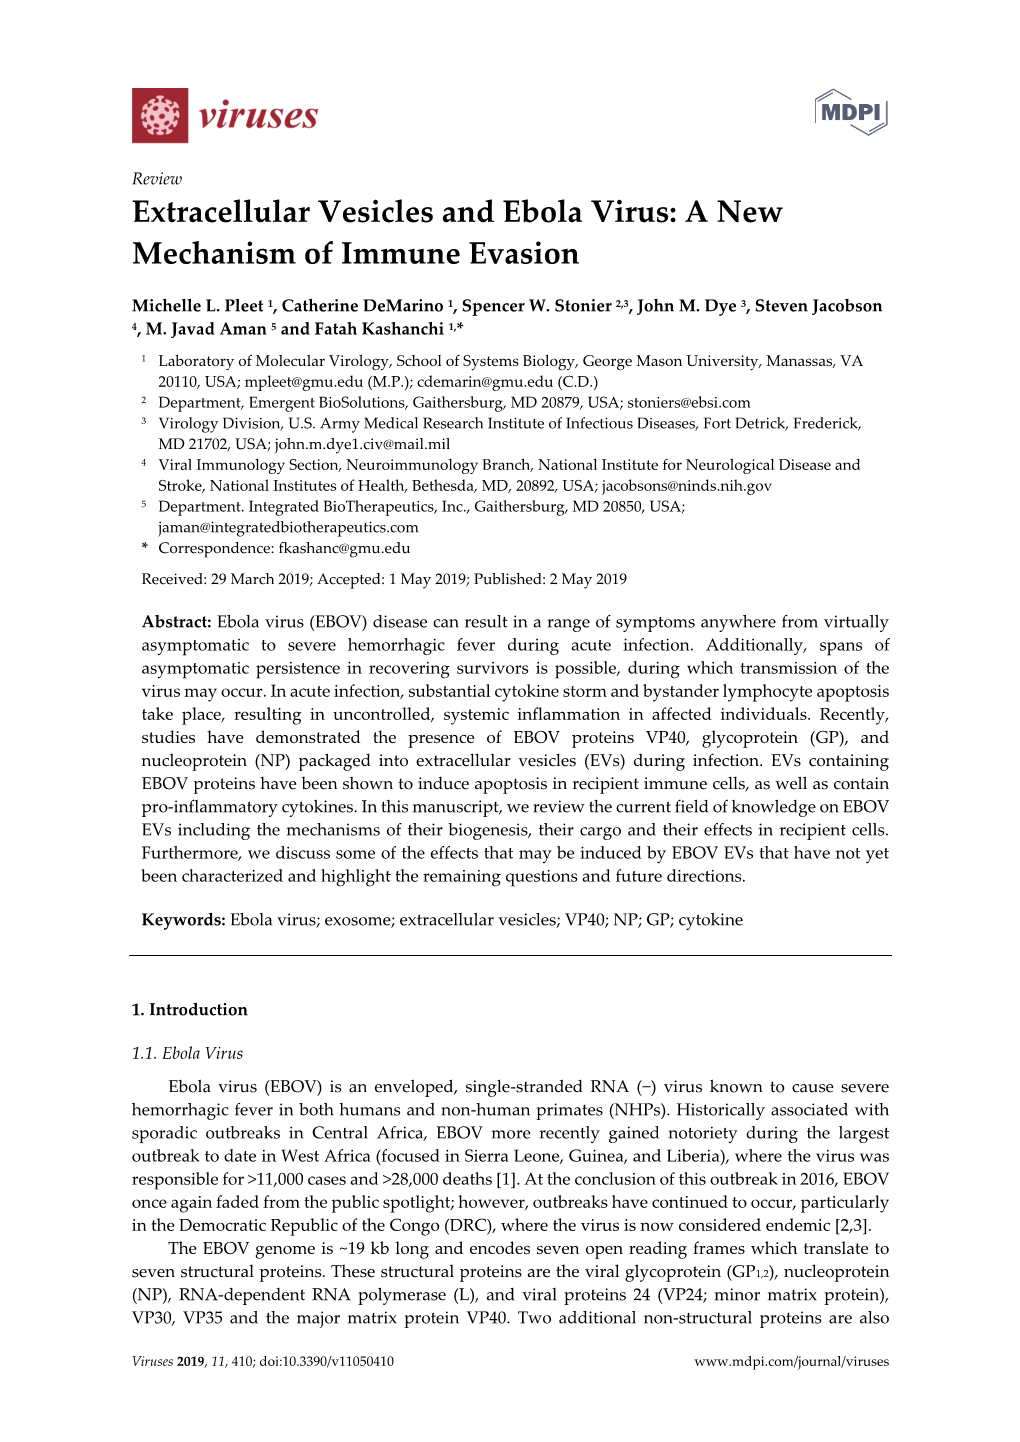 Extracellular Vesicles and Ebola Virus: a New Mechanism of Immune Evasion